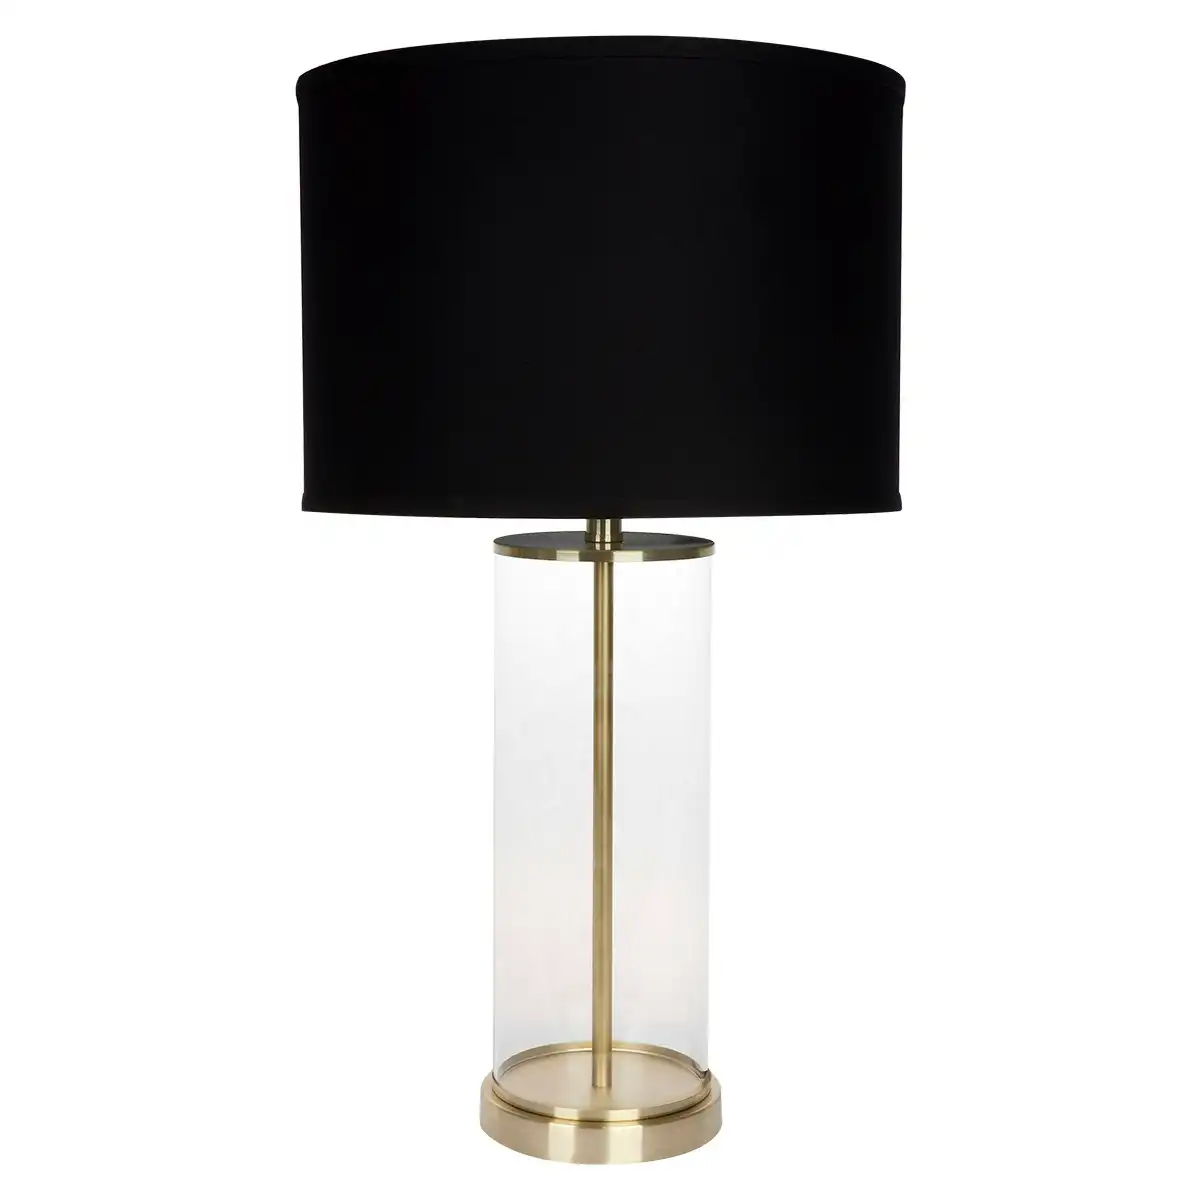 Cafe Lighting Left Bank Table Lamp - Brass with Black Shade